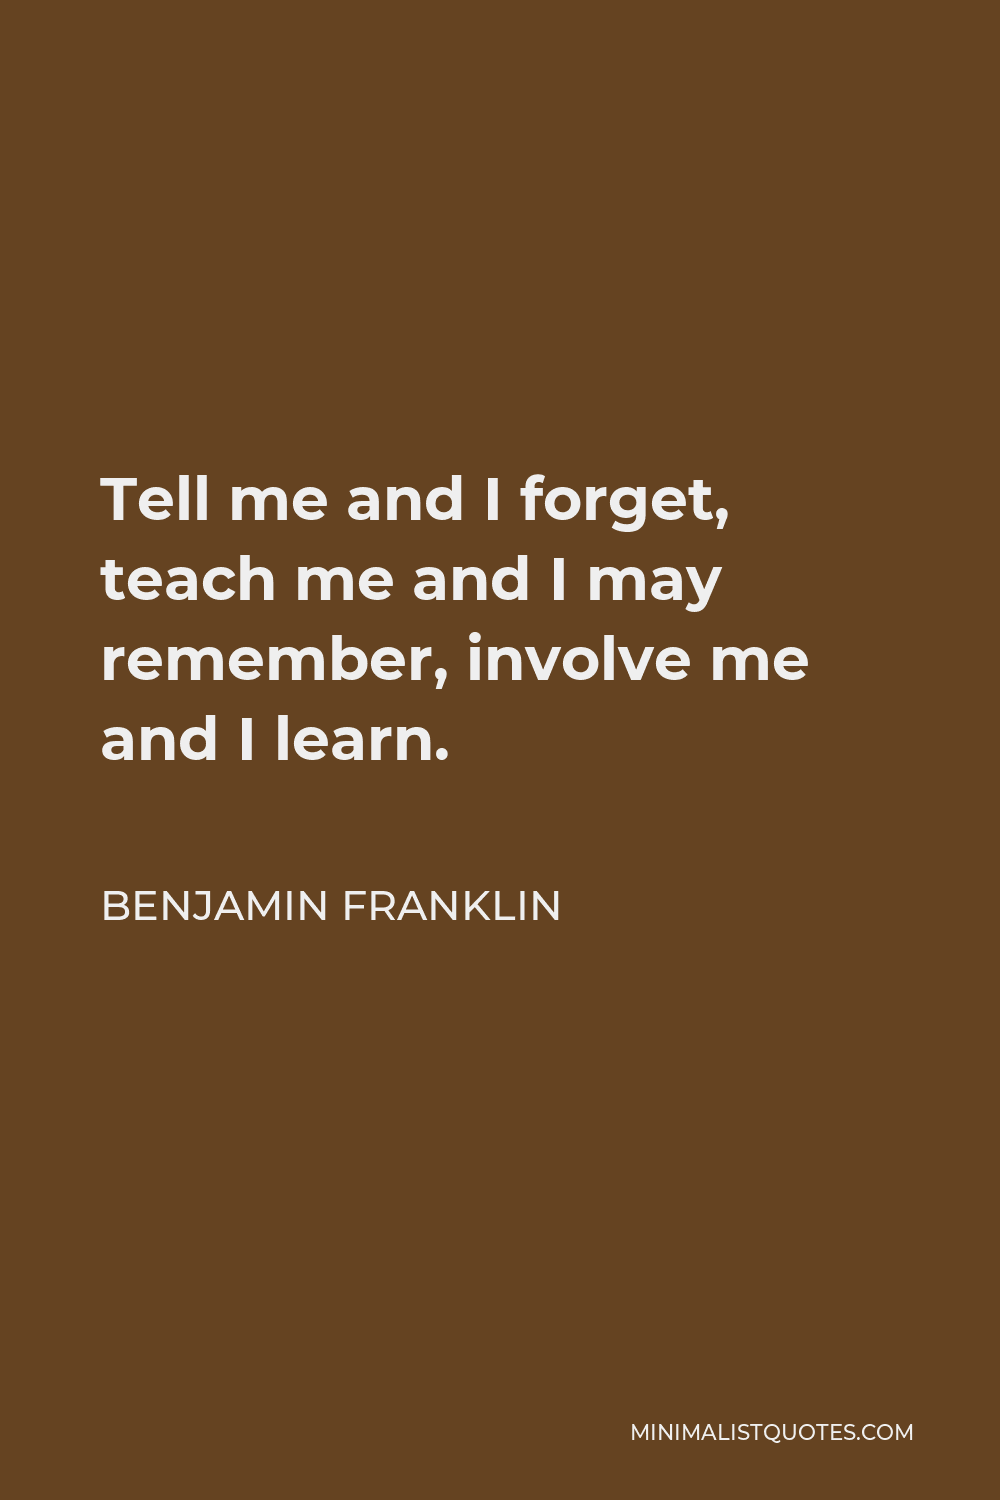 Benjamin Franklin Quote: Tell me and I forget, teach me and I may ...